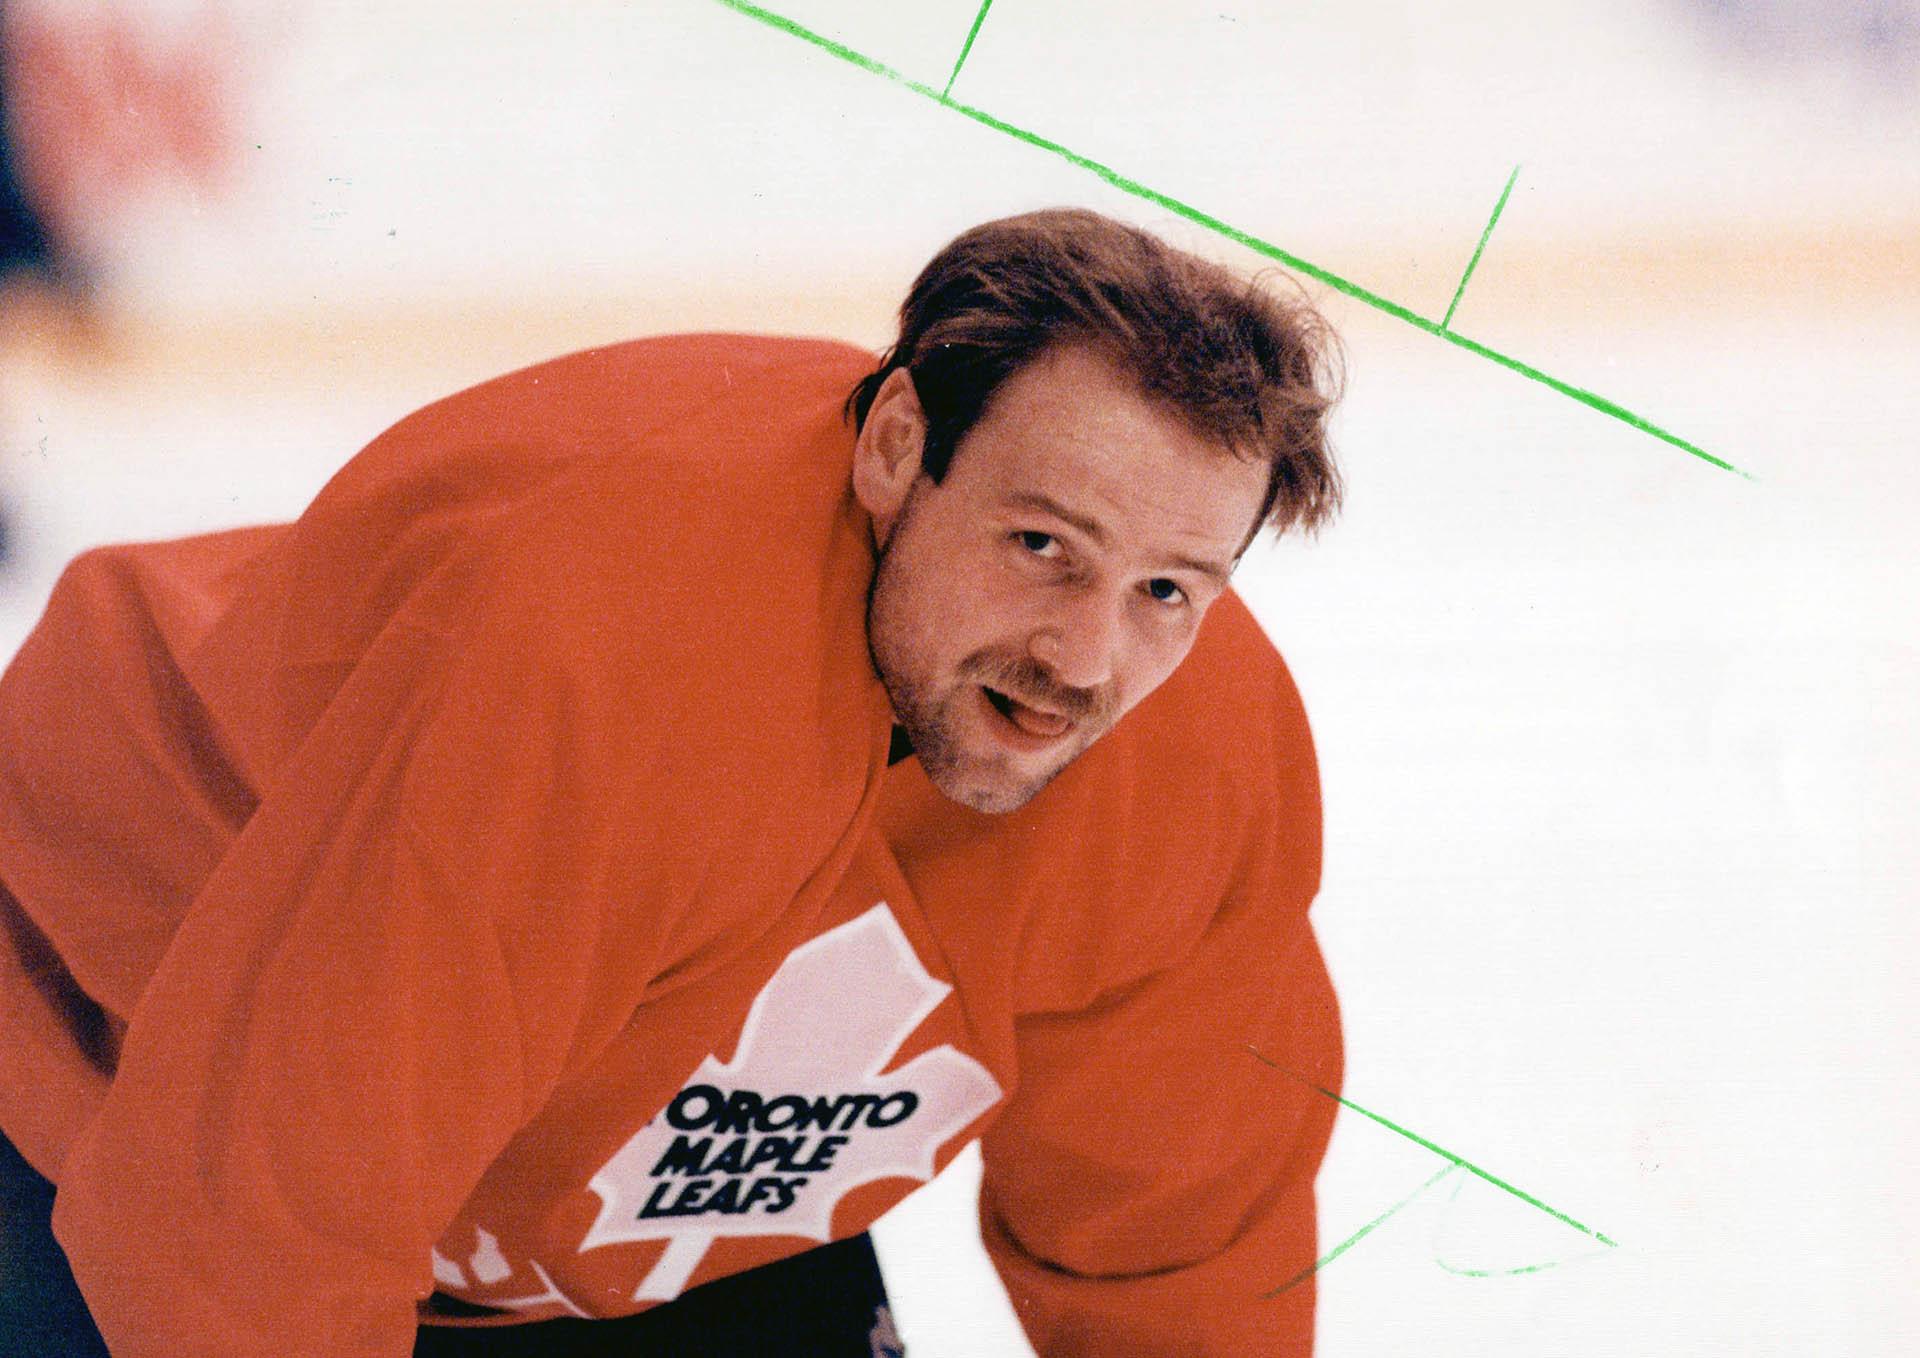 Wendel Clark on what it means to wear the 'C' in Toronto